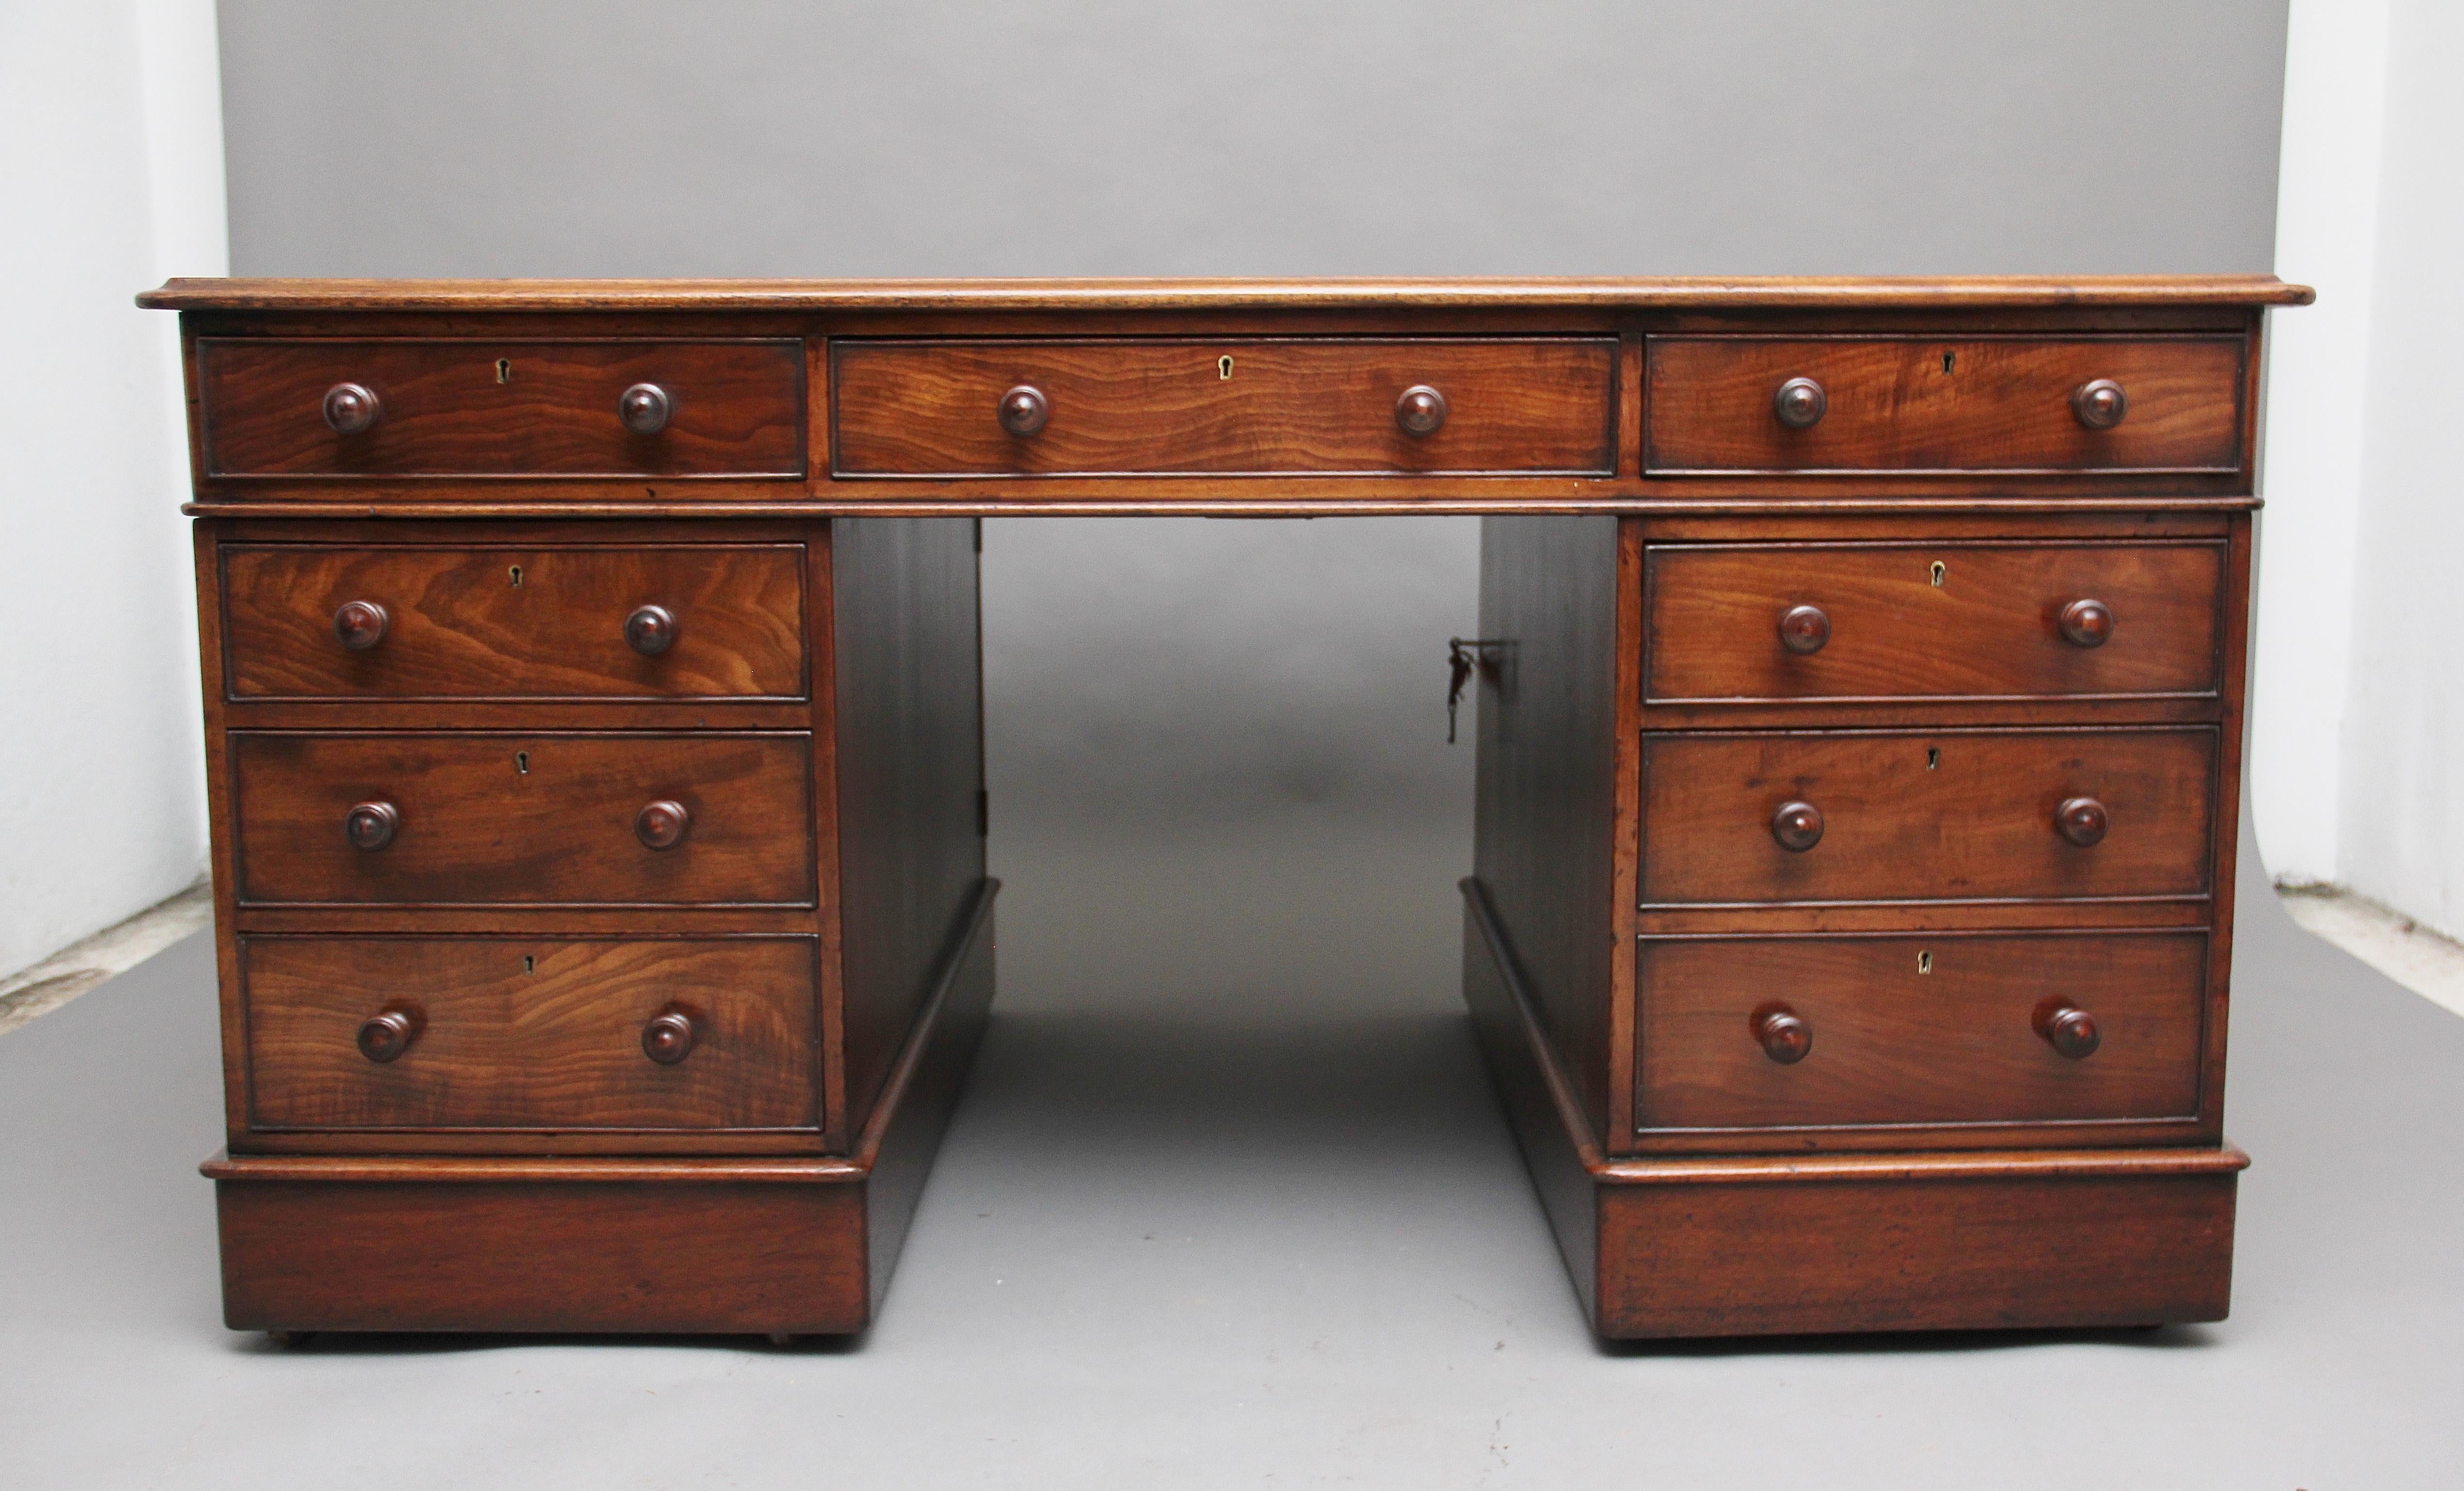 Early 19th century mahogany partners desk, the moulded edge top having a burgundy colored leather writing surface decorated with gold and blind tooling, the desk has an arrangement of nine graduated mahogany lined drawers at the front with turned